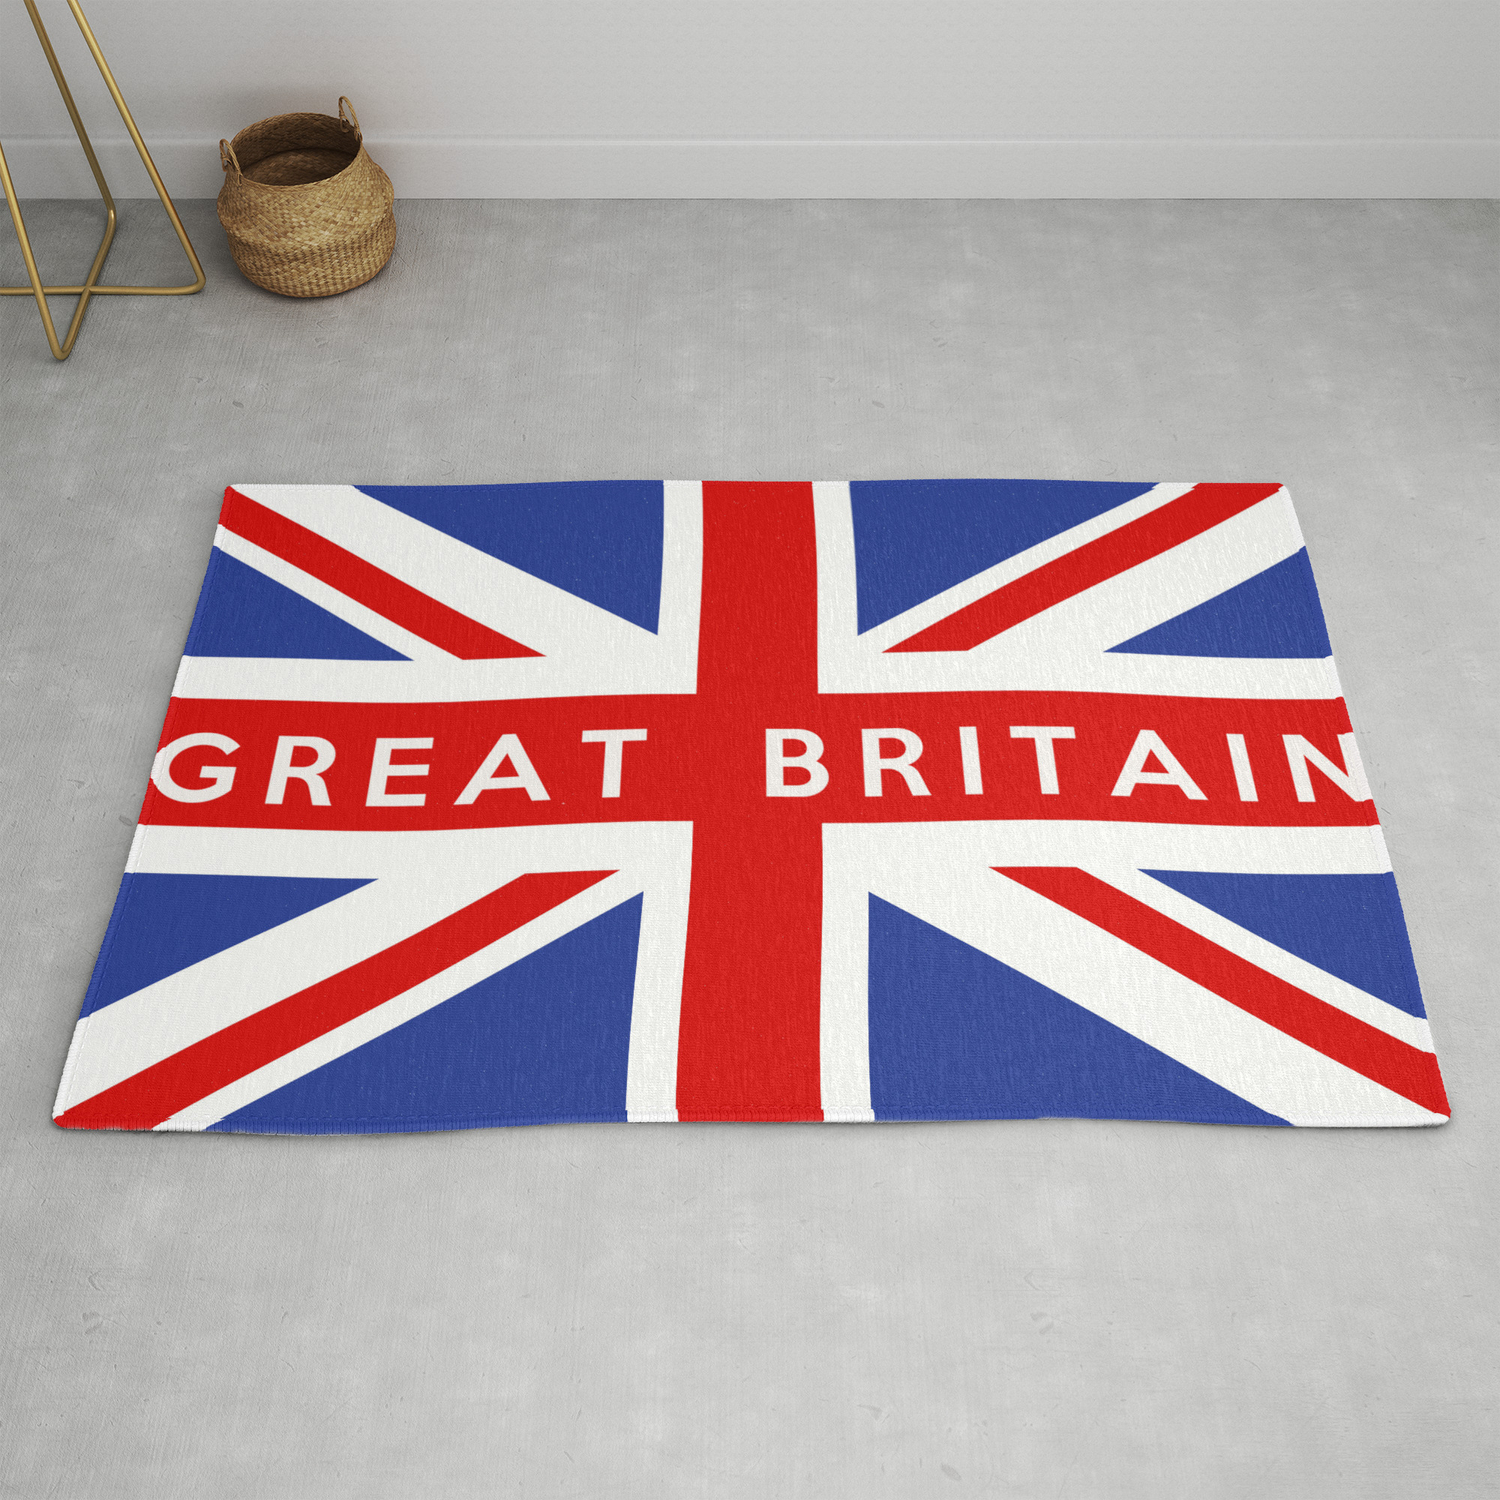 Great britain countries